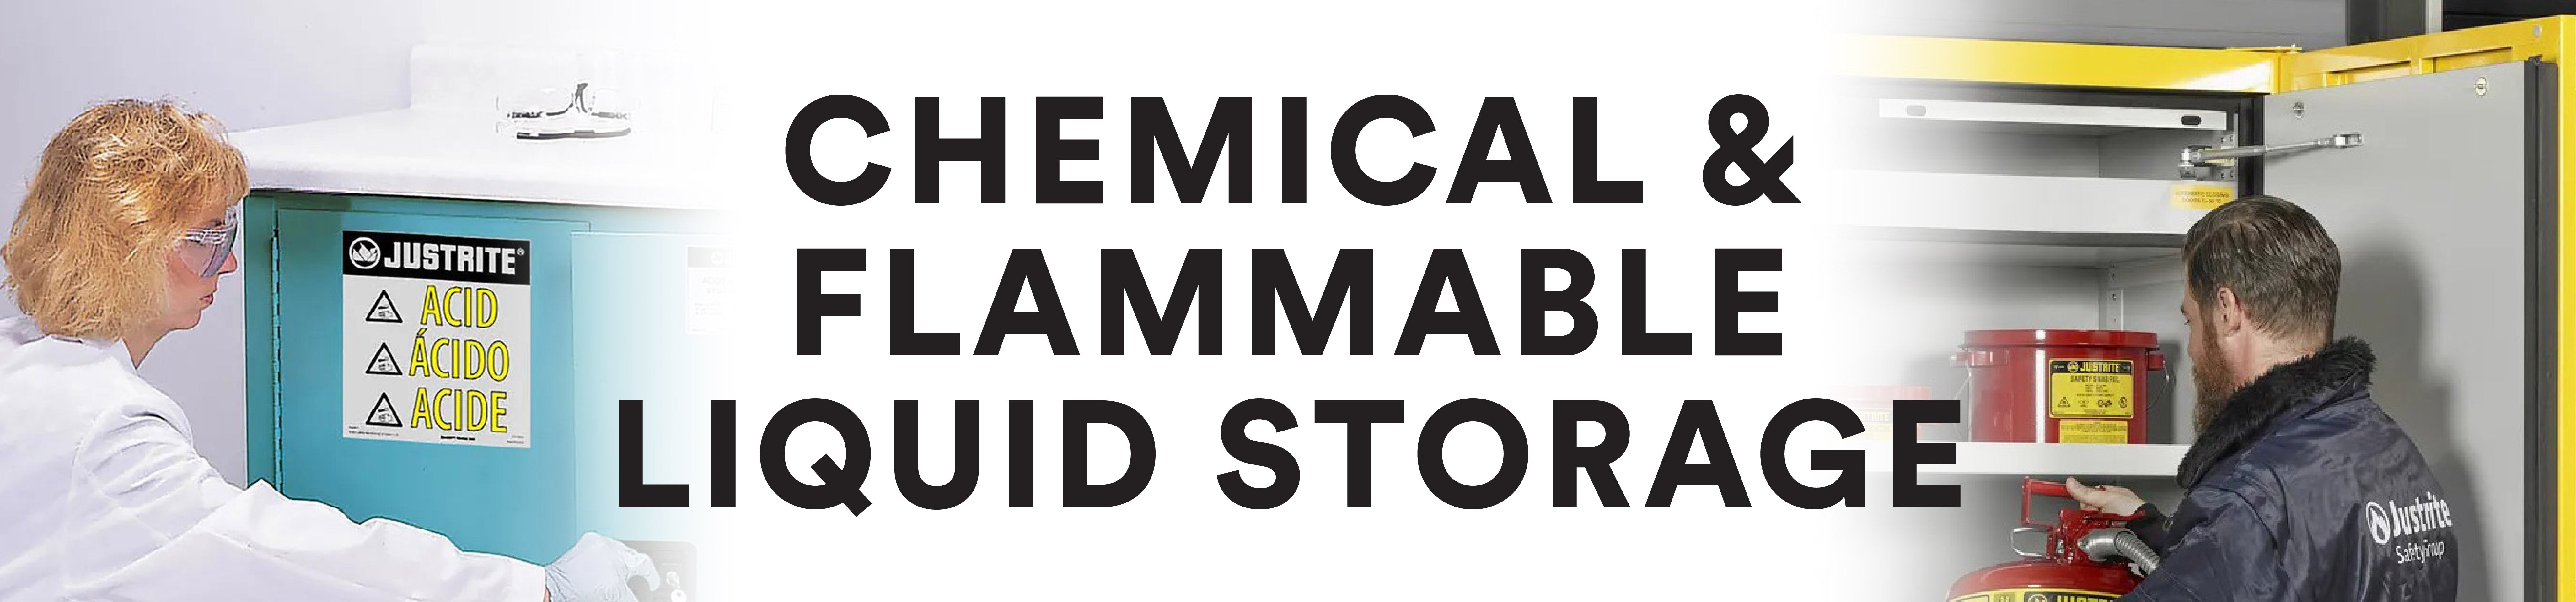 Chemical & Flammable Liquid Storage